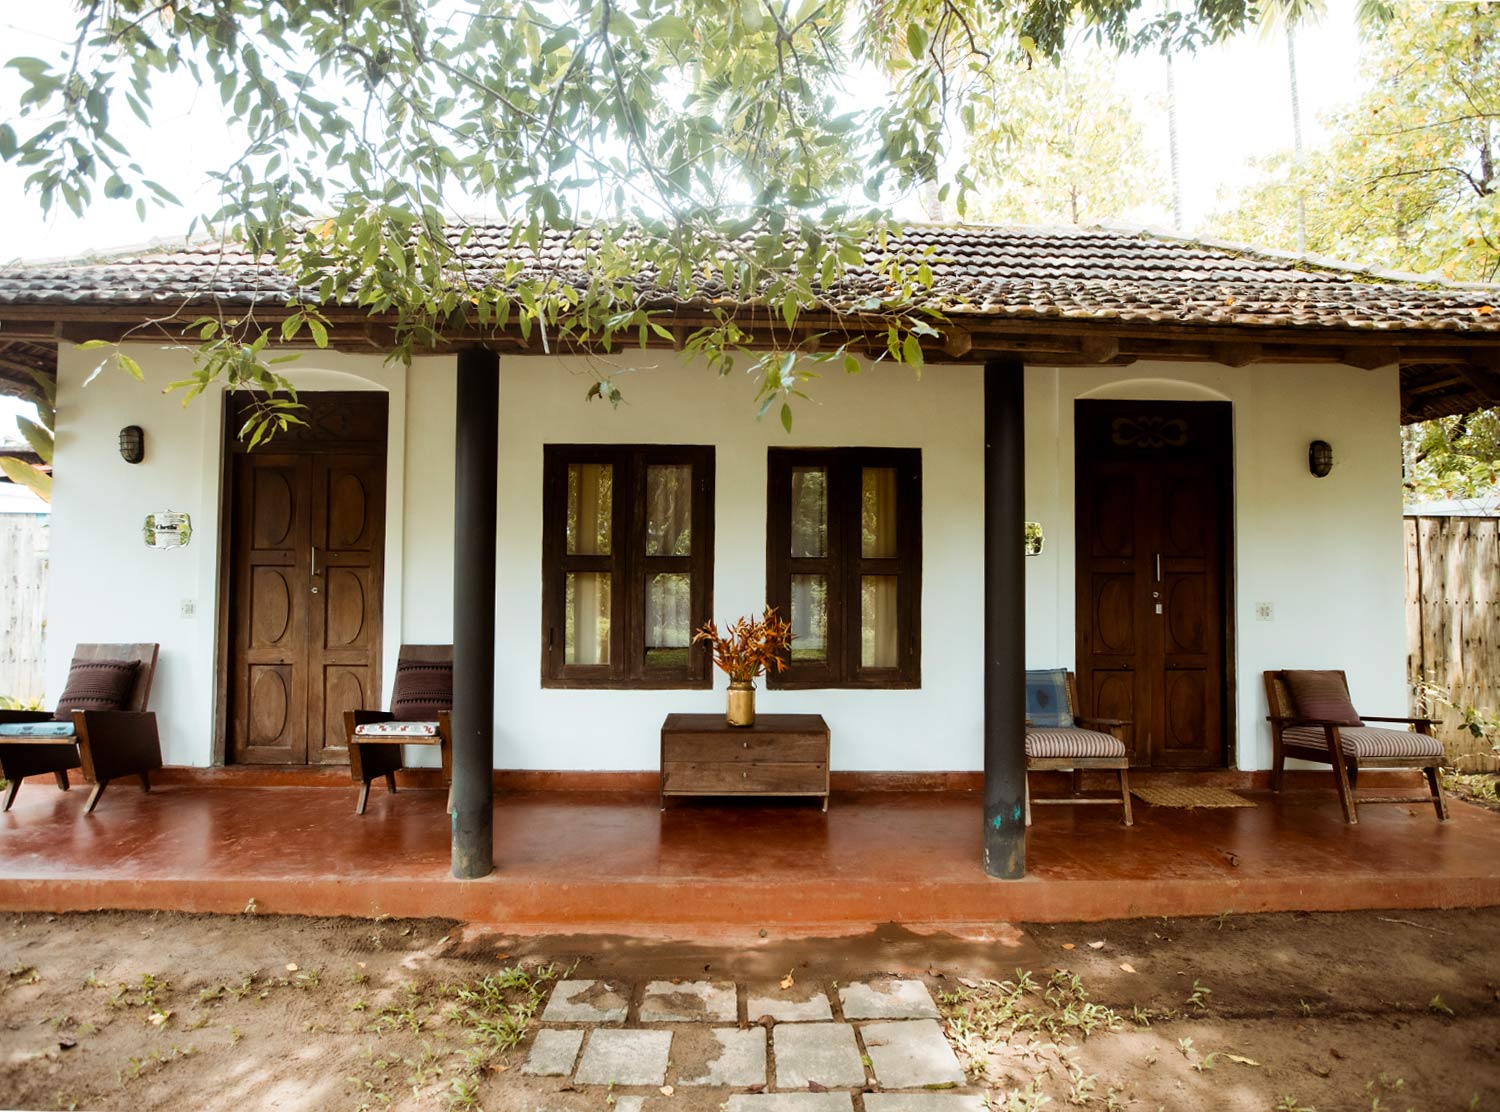 Kayal is a secluded retreat with just four cottages